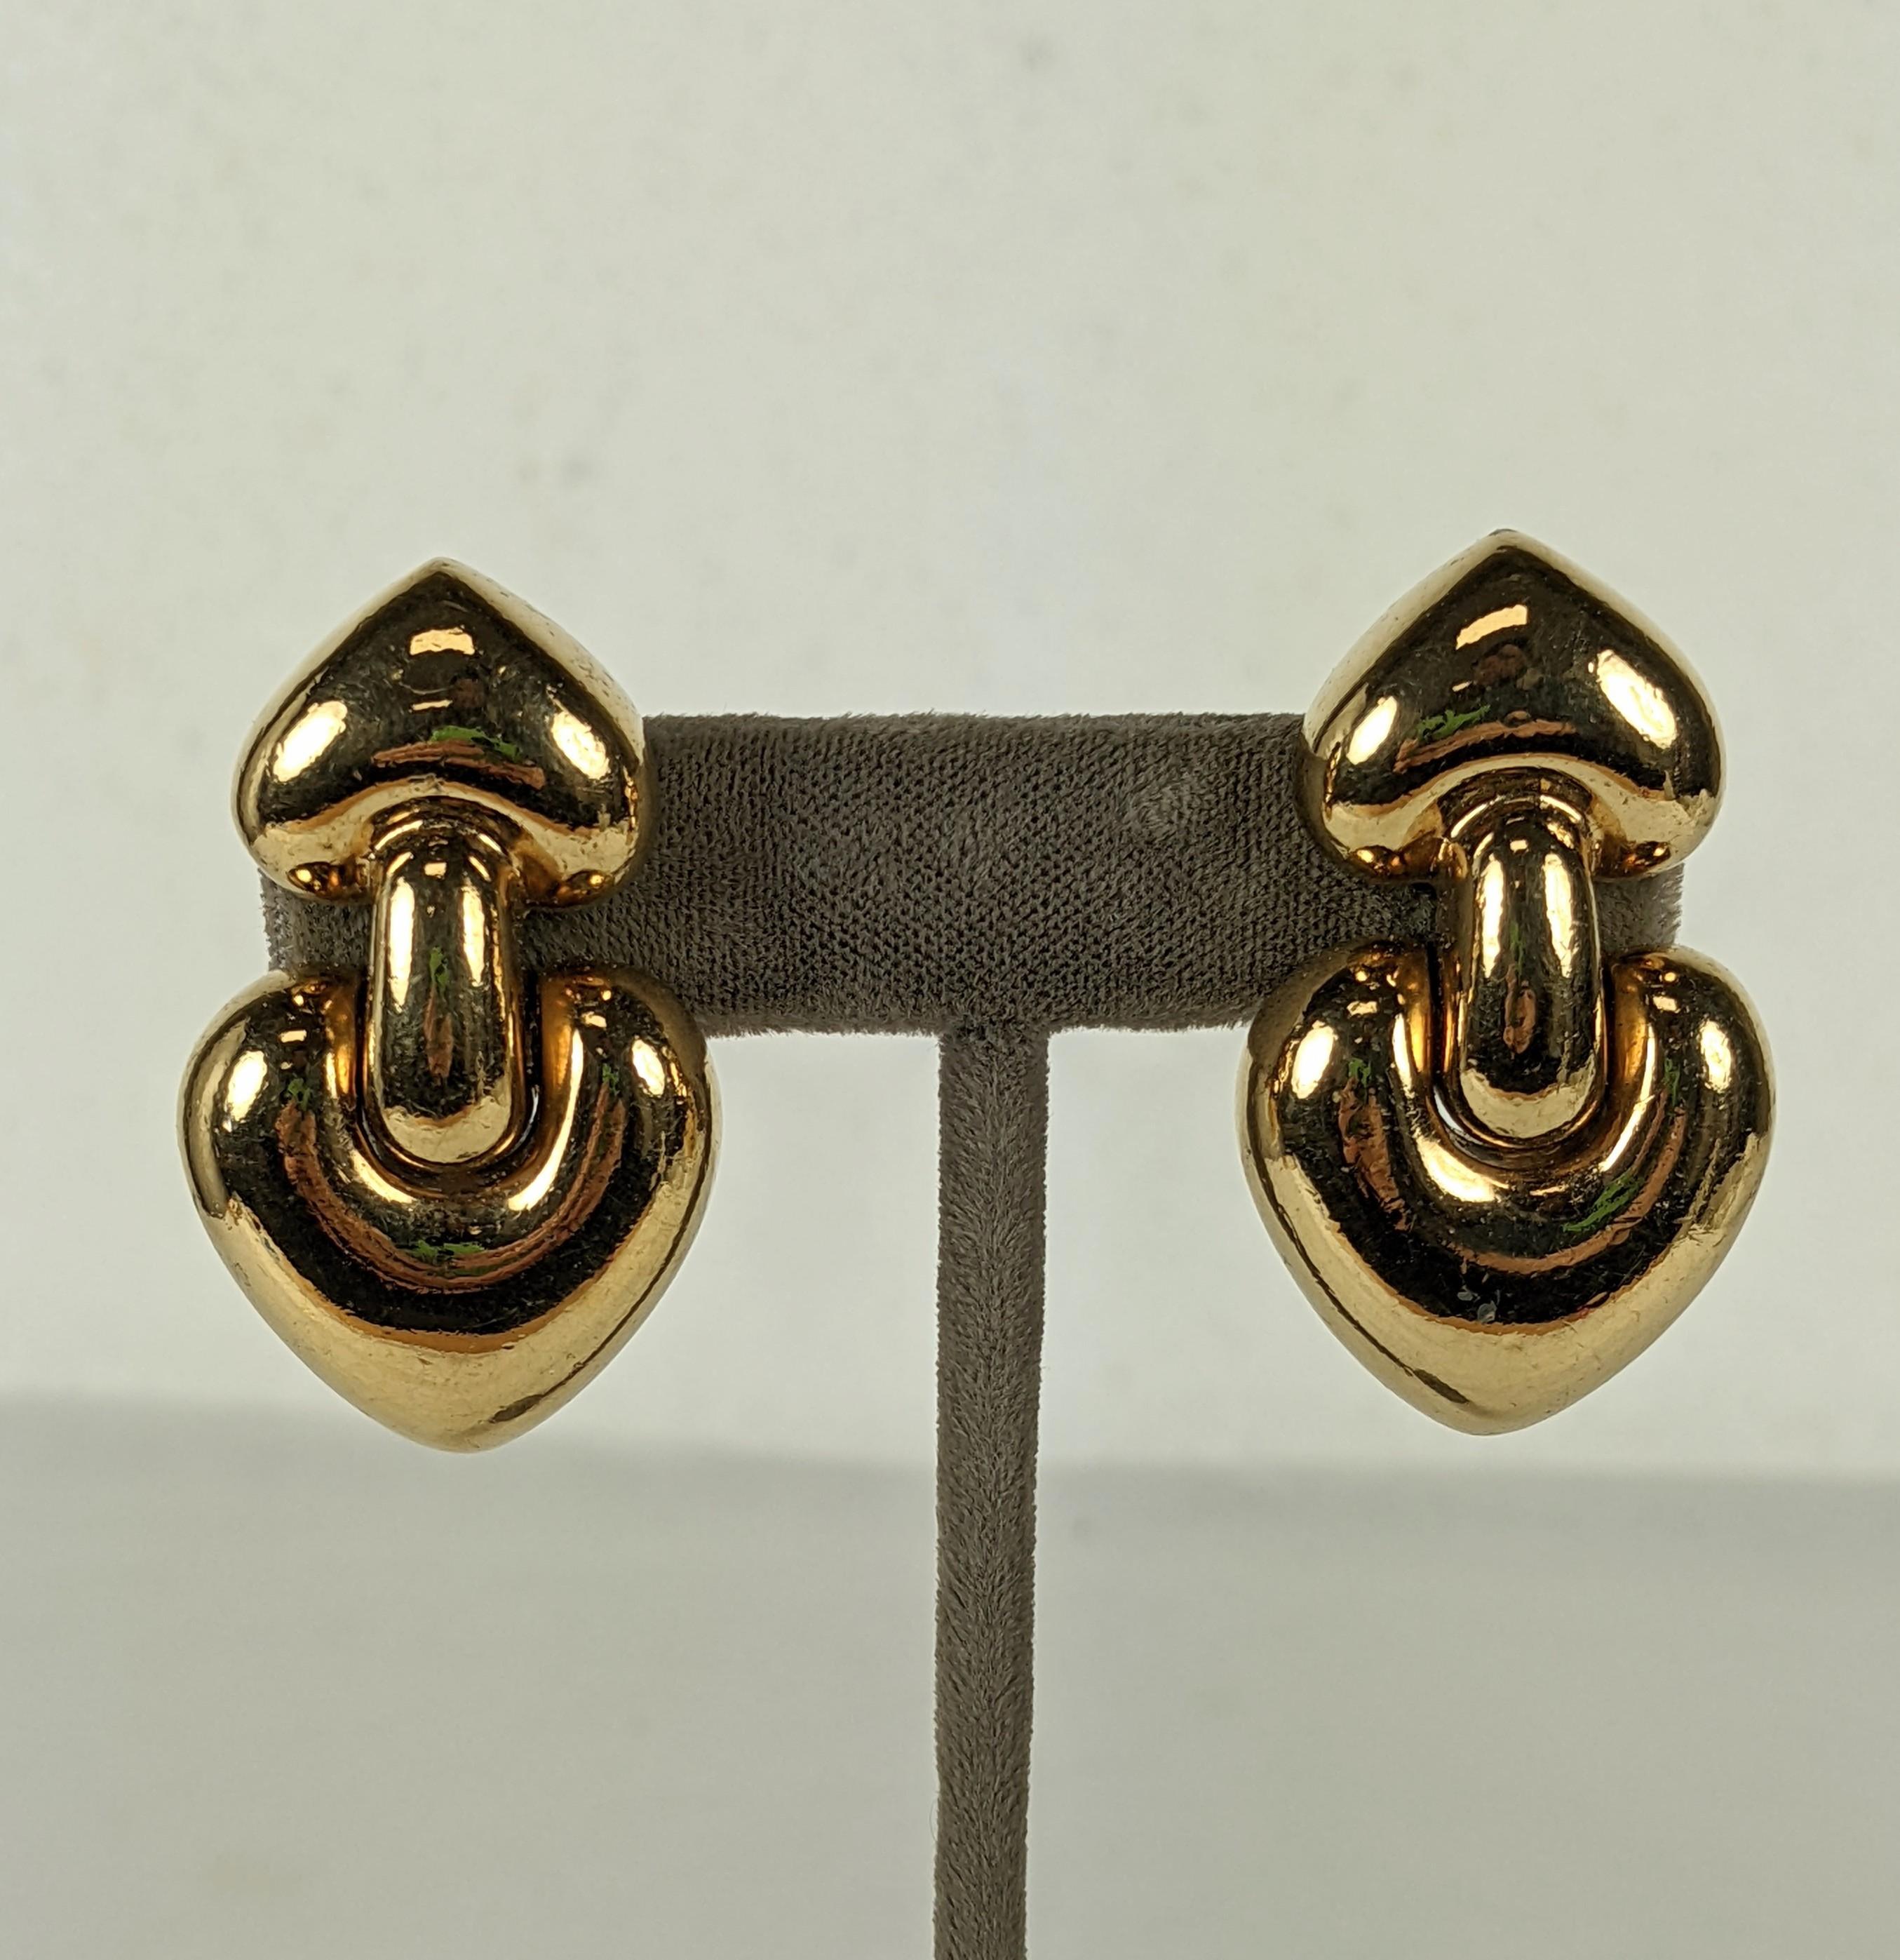 Bold Bulgari Style Gold Door Knocker Earrings by Ciner, NY. Gold plated articulated earrings with clip back fittings. 1990's USA.  1.75